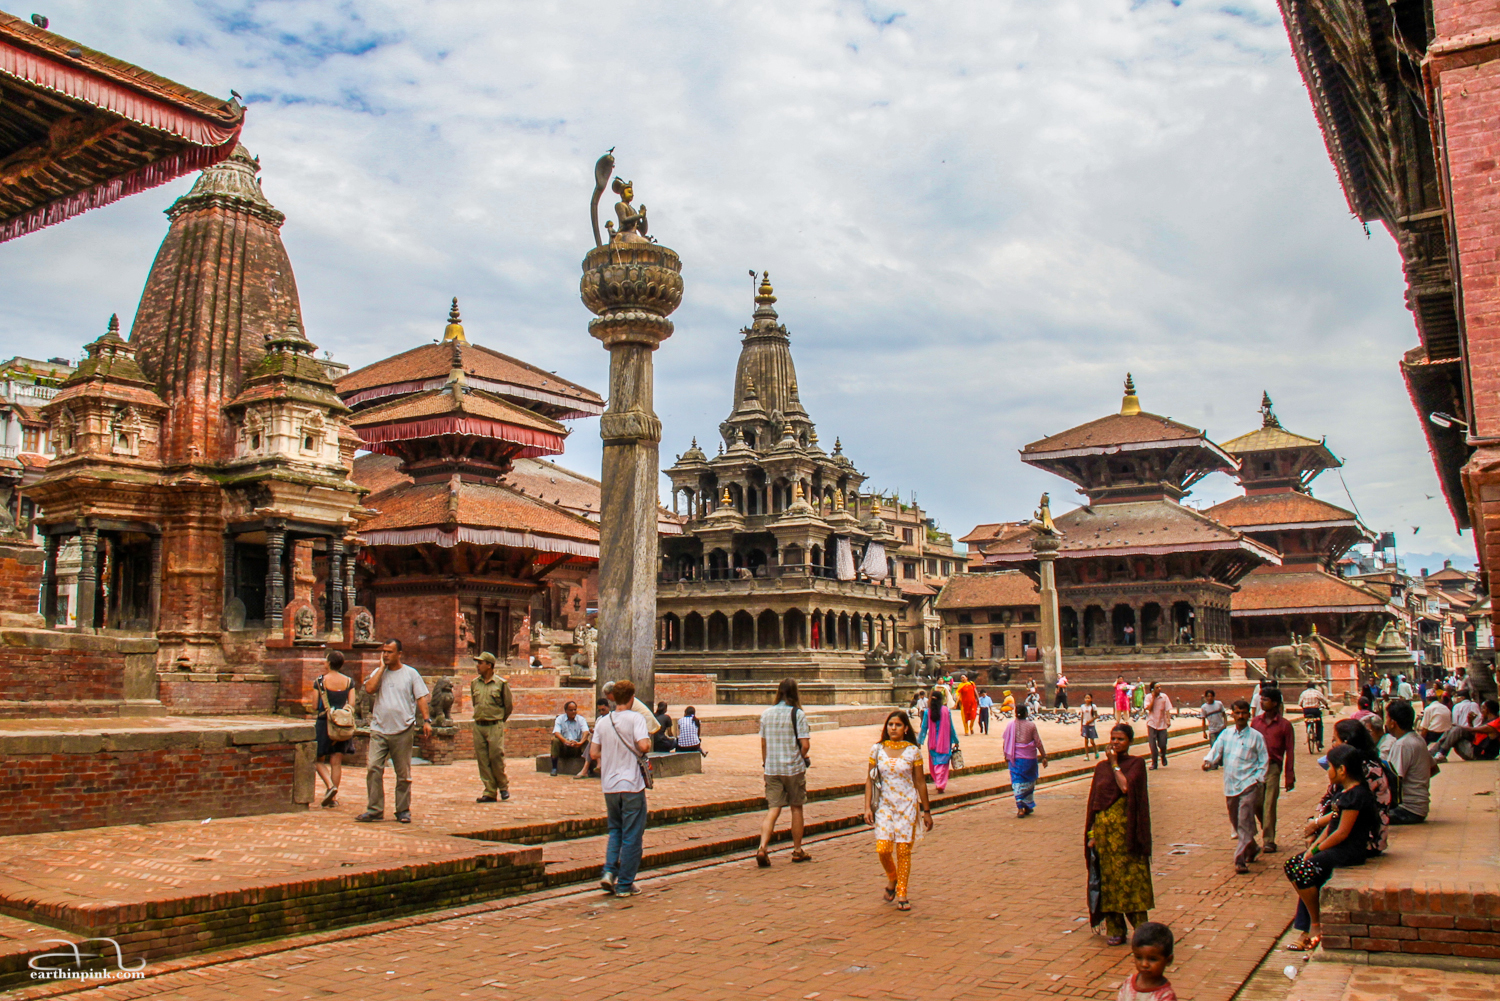 An incredible concentration of Hindu and Buddhist temples in the Durbar Square of Patan, Nepal.